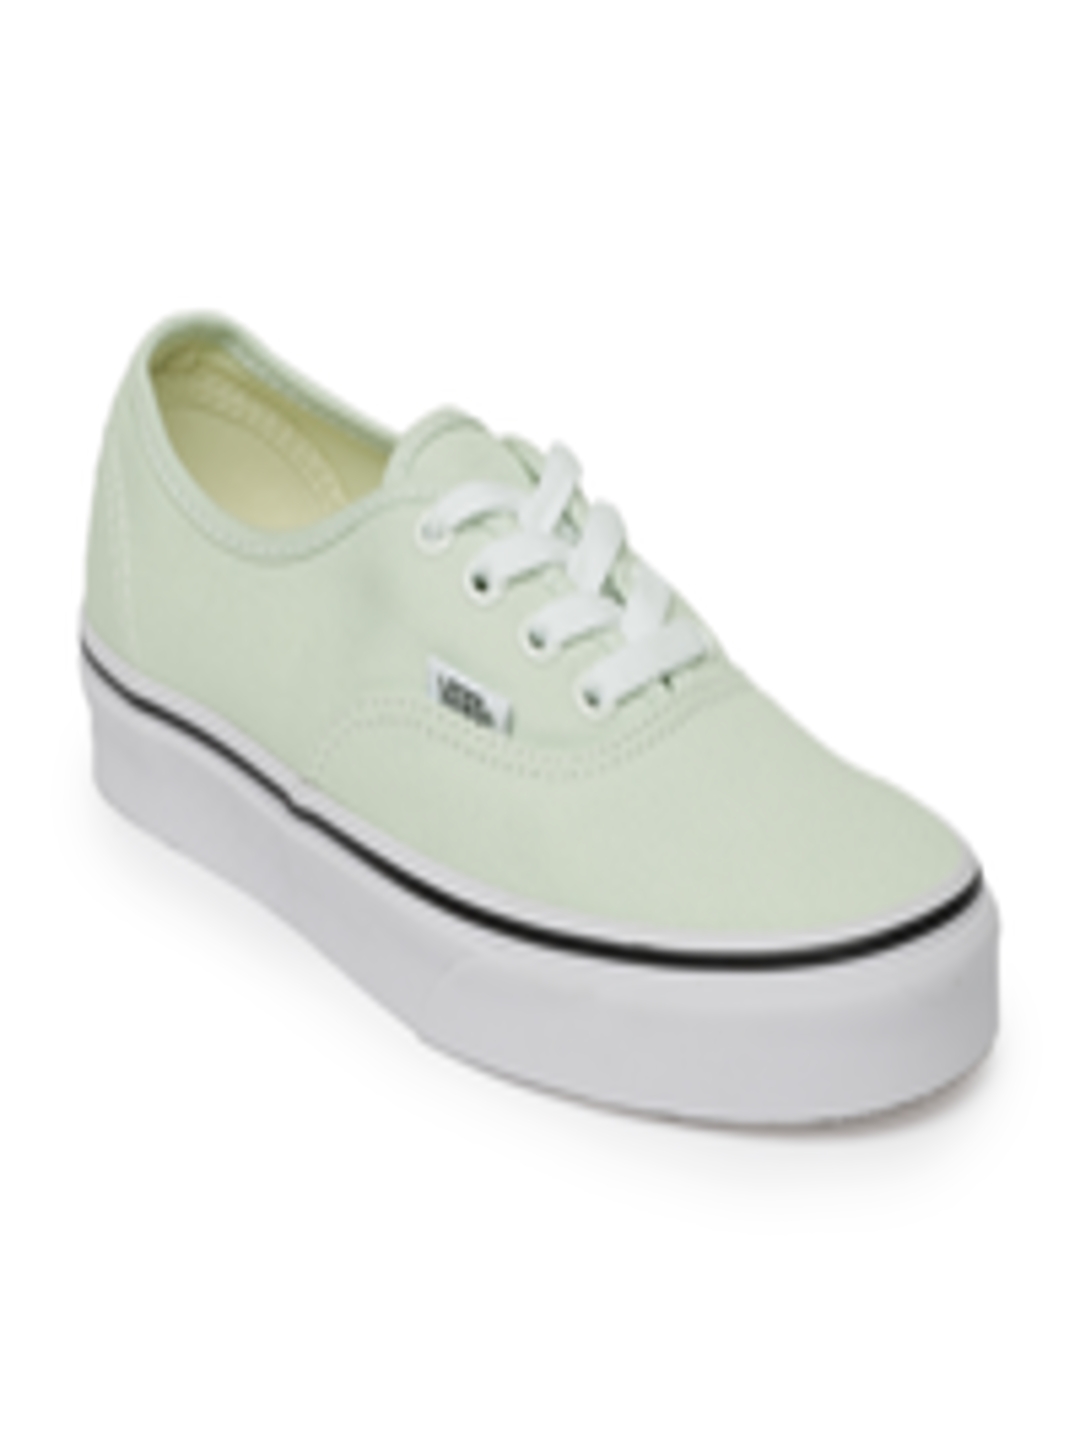 Buy Vans Unisex Green Sneakers - Casual Shoes for Unisex 4294124 | Myntra